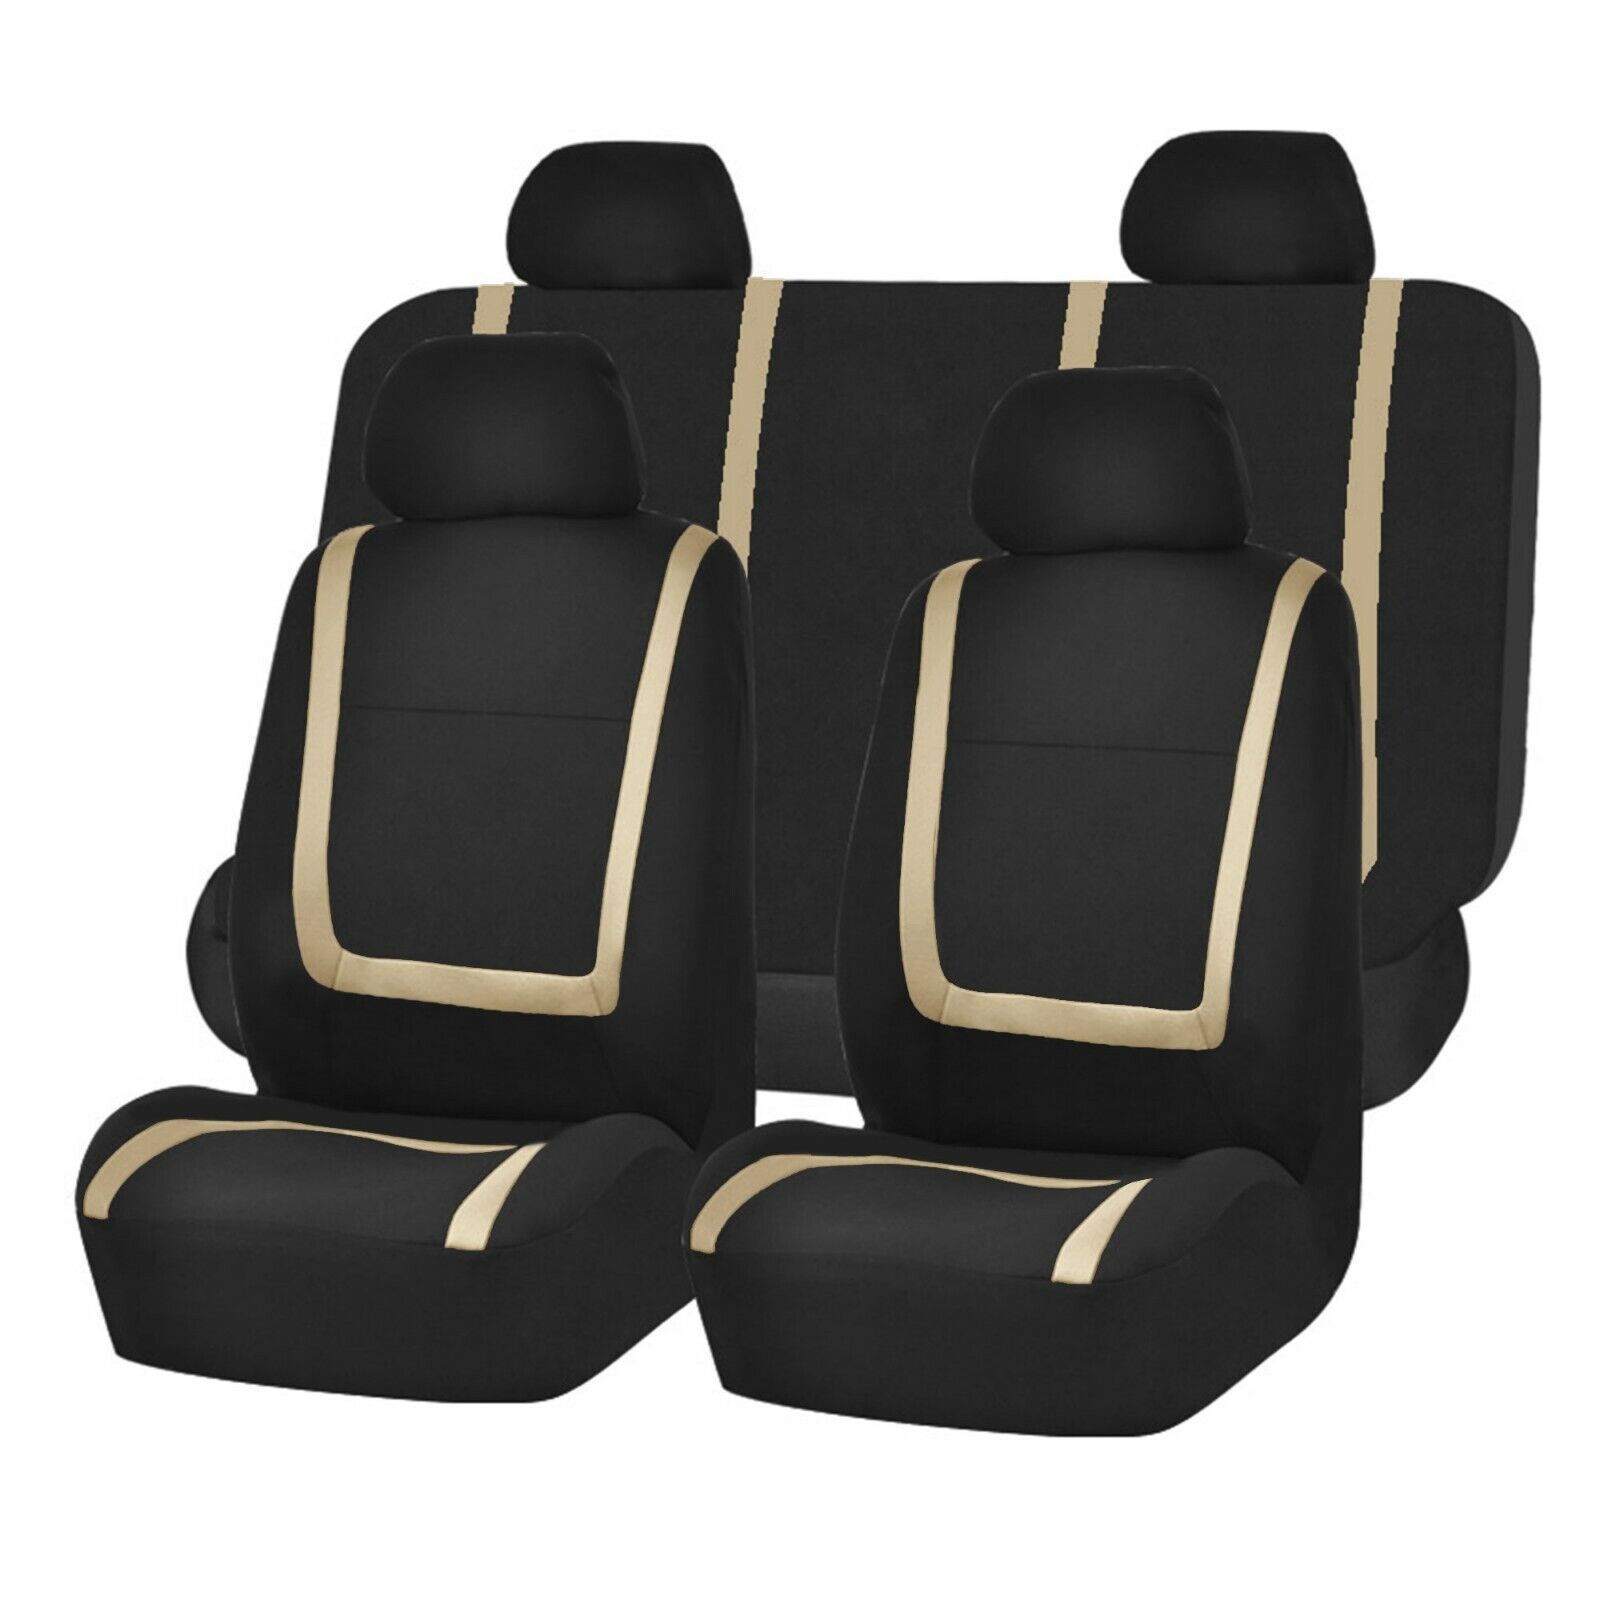 Universal Polyester Auto Seat Covers for Cars, Trucks, SUVs, and Vans